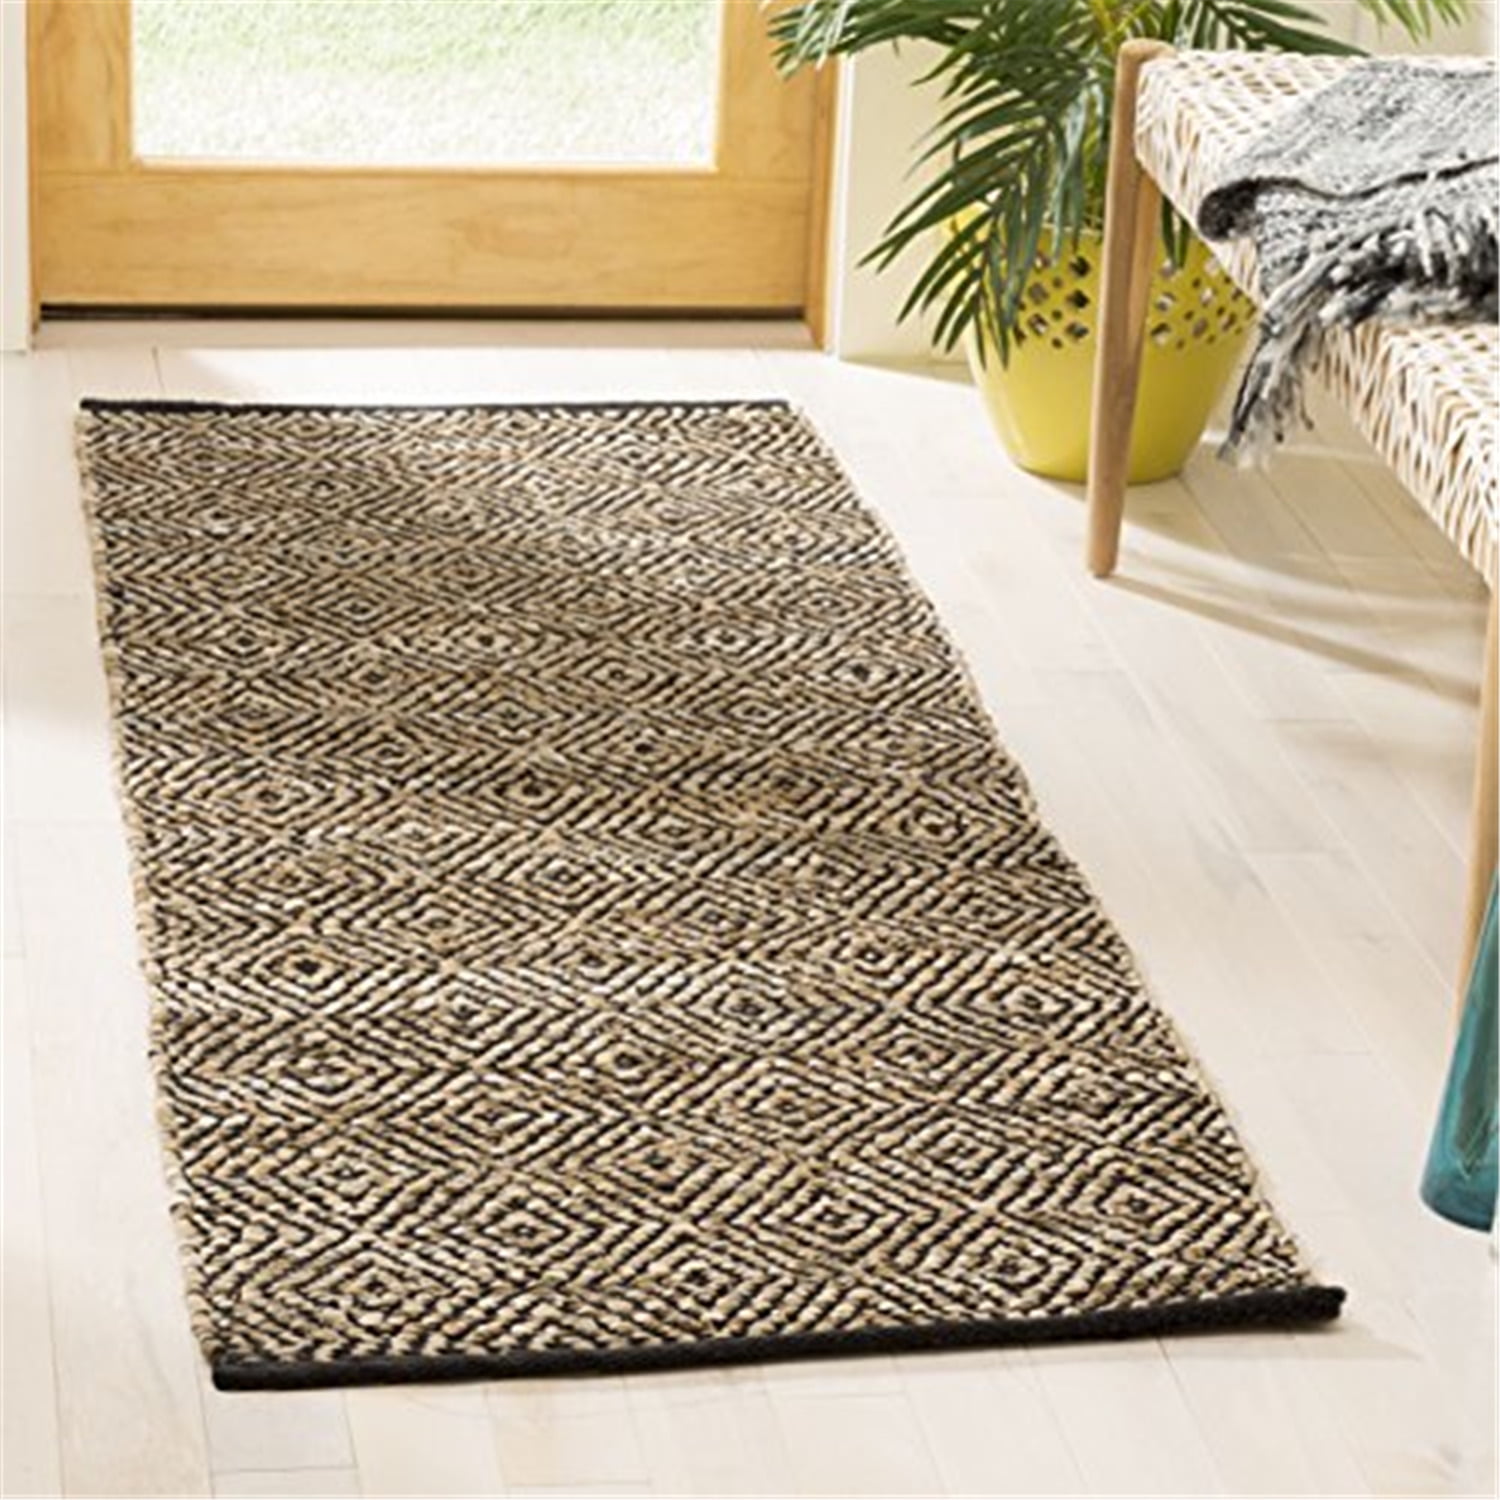 Rag Rug Runner in Sage Green 24"x72" Great Throw Rug for High Traffic Cotton 